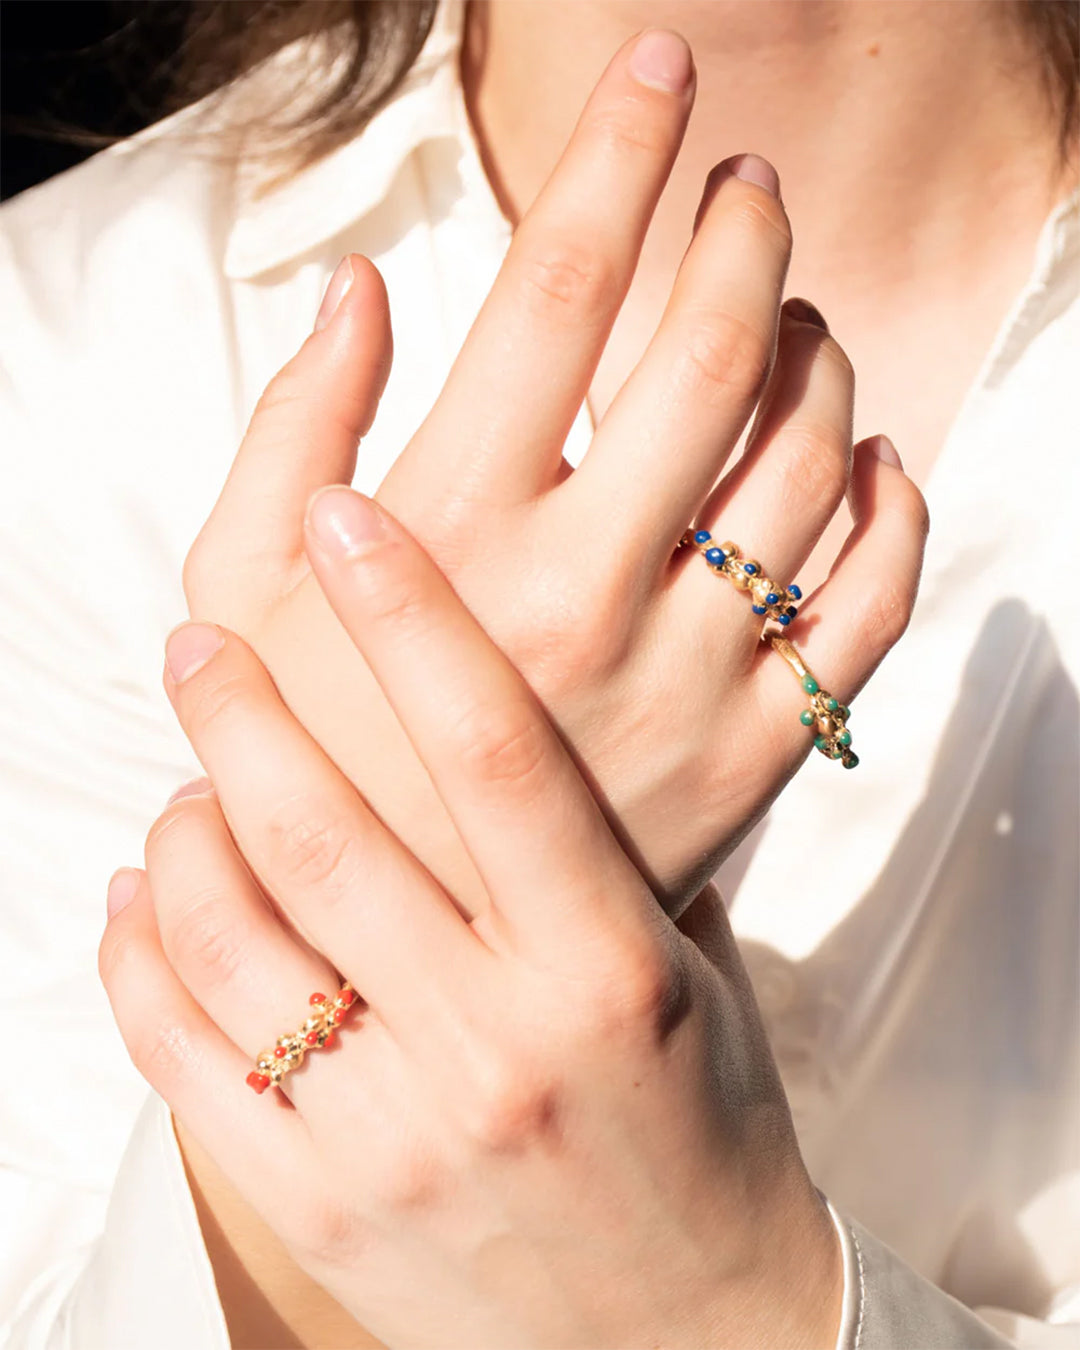 Close-up of a creative hand adorned with vibrant, handcrafted memory rings, showcasing artisan jewelry